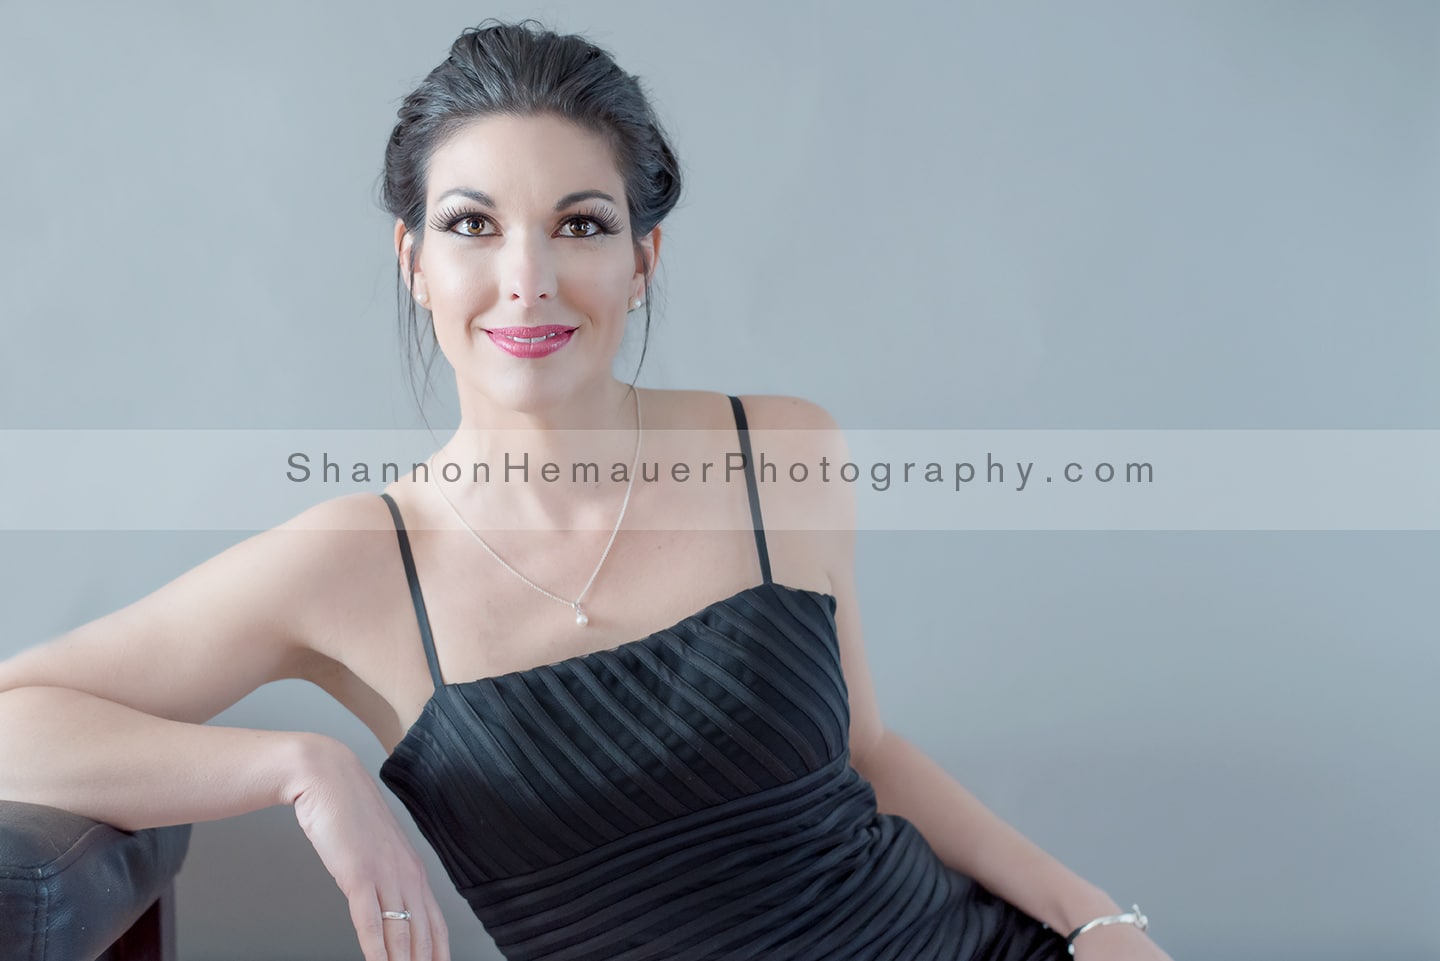 Contemporary Glamour | Shannon Hemauer Photography York PA